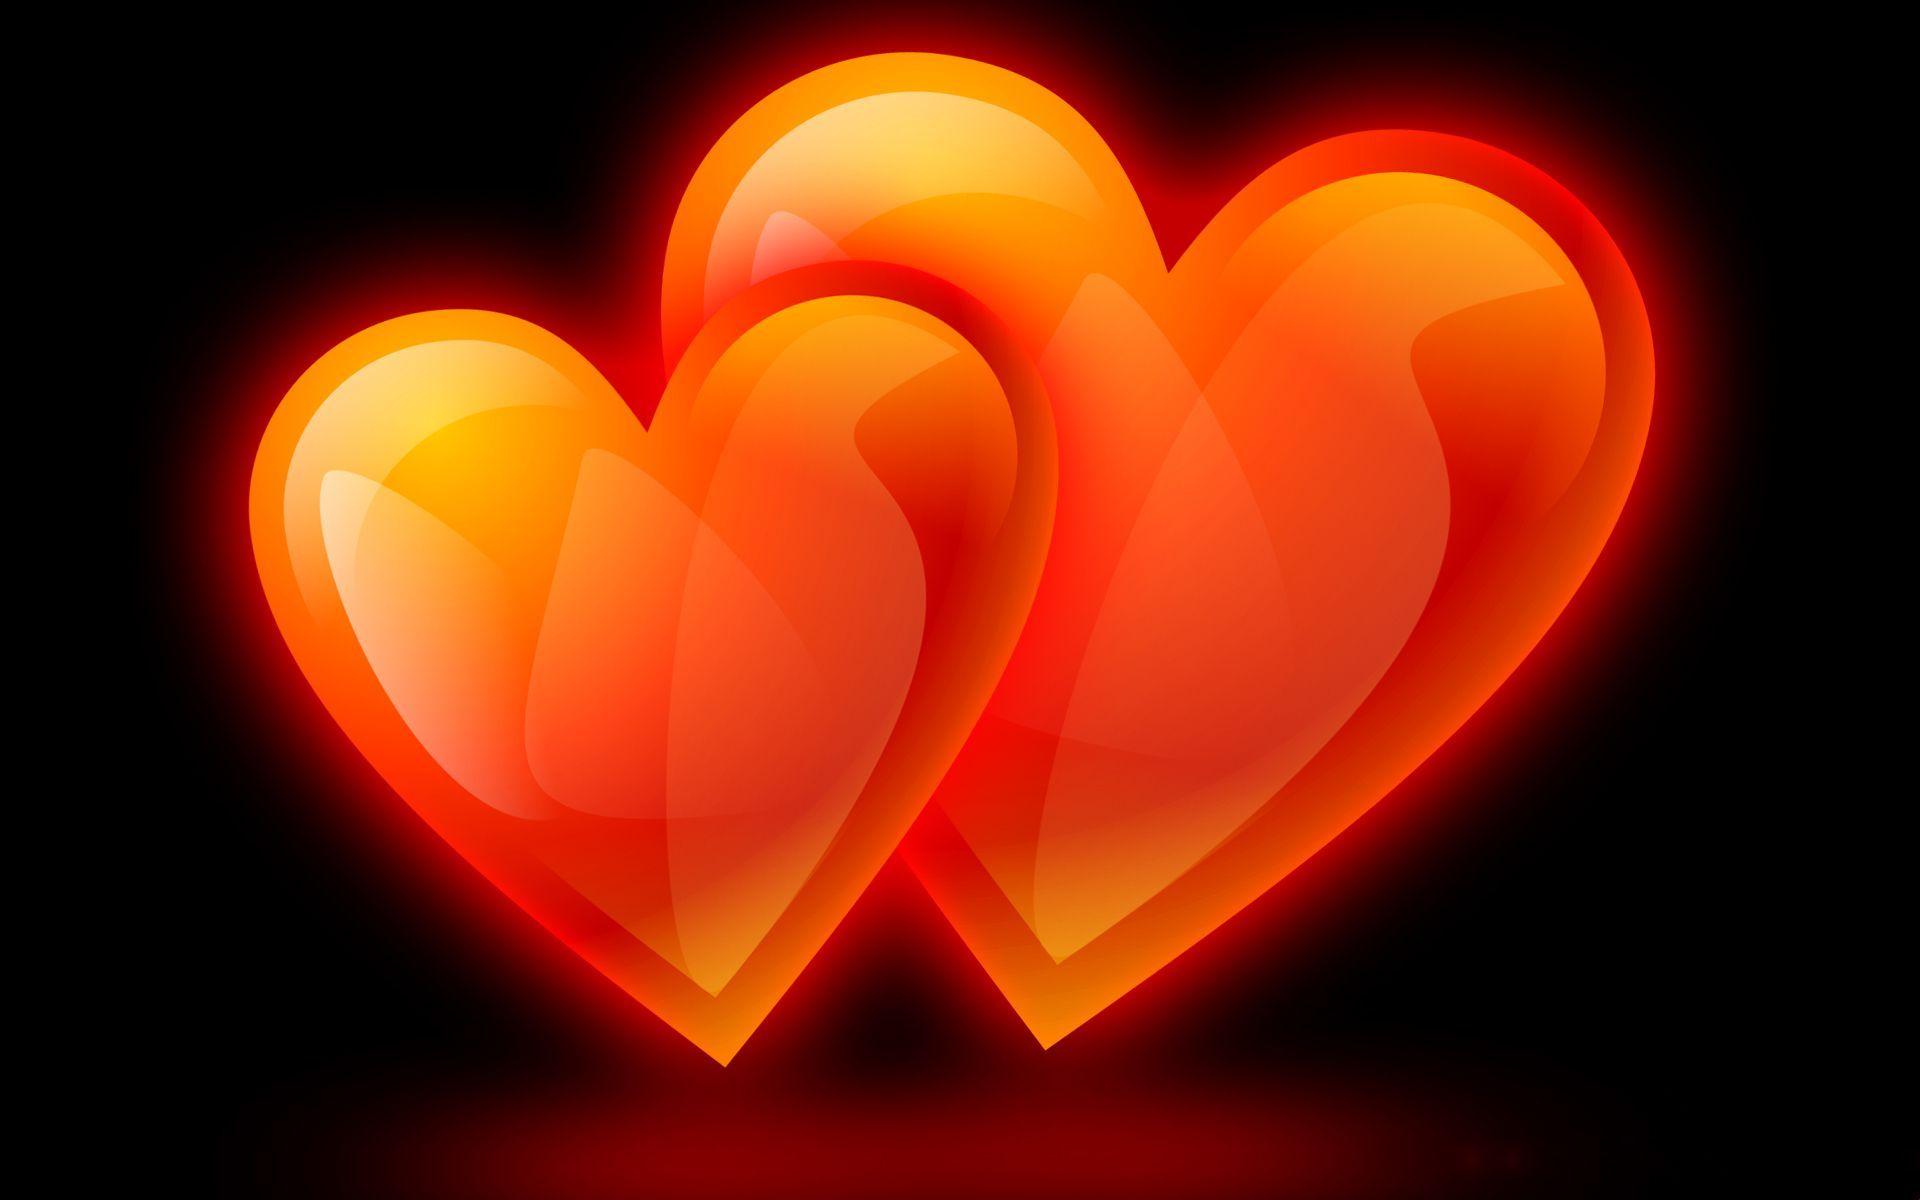 Hearts With Black Backgrounds - Wallpaper Cave